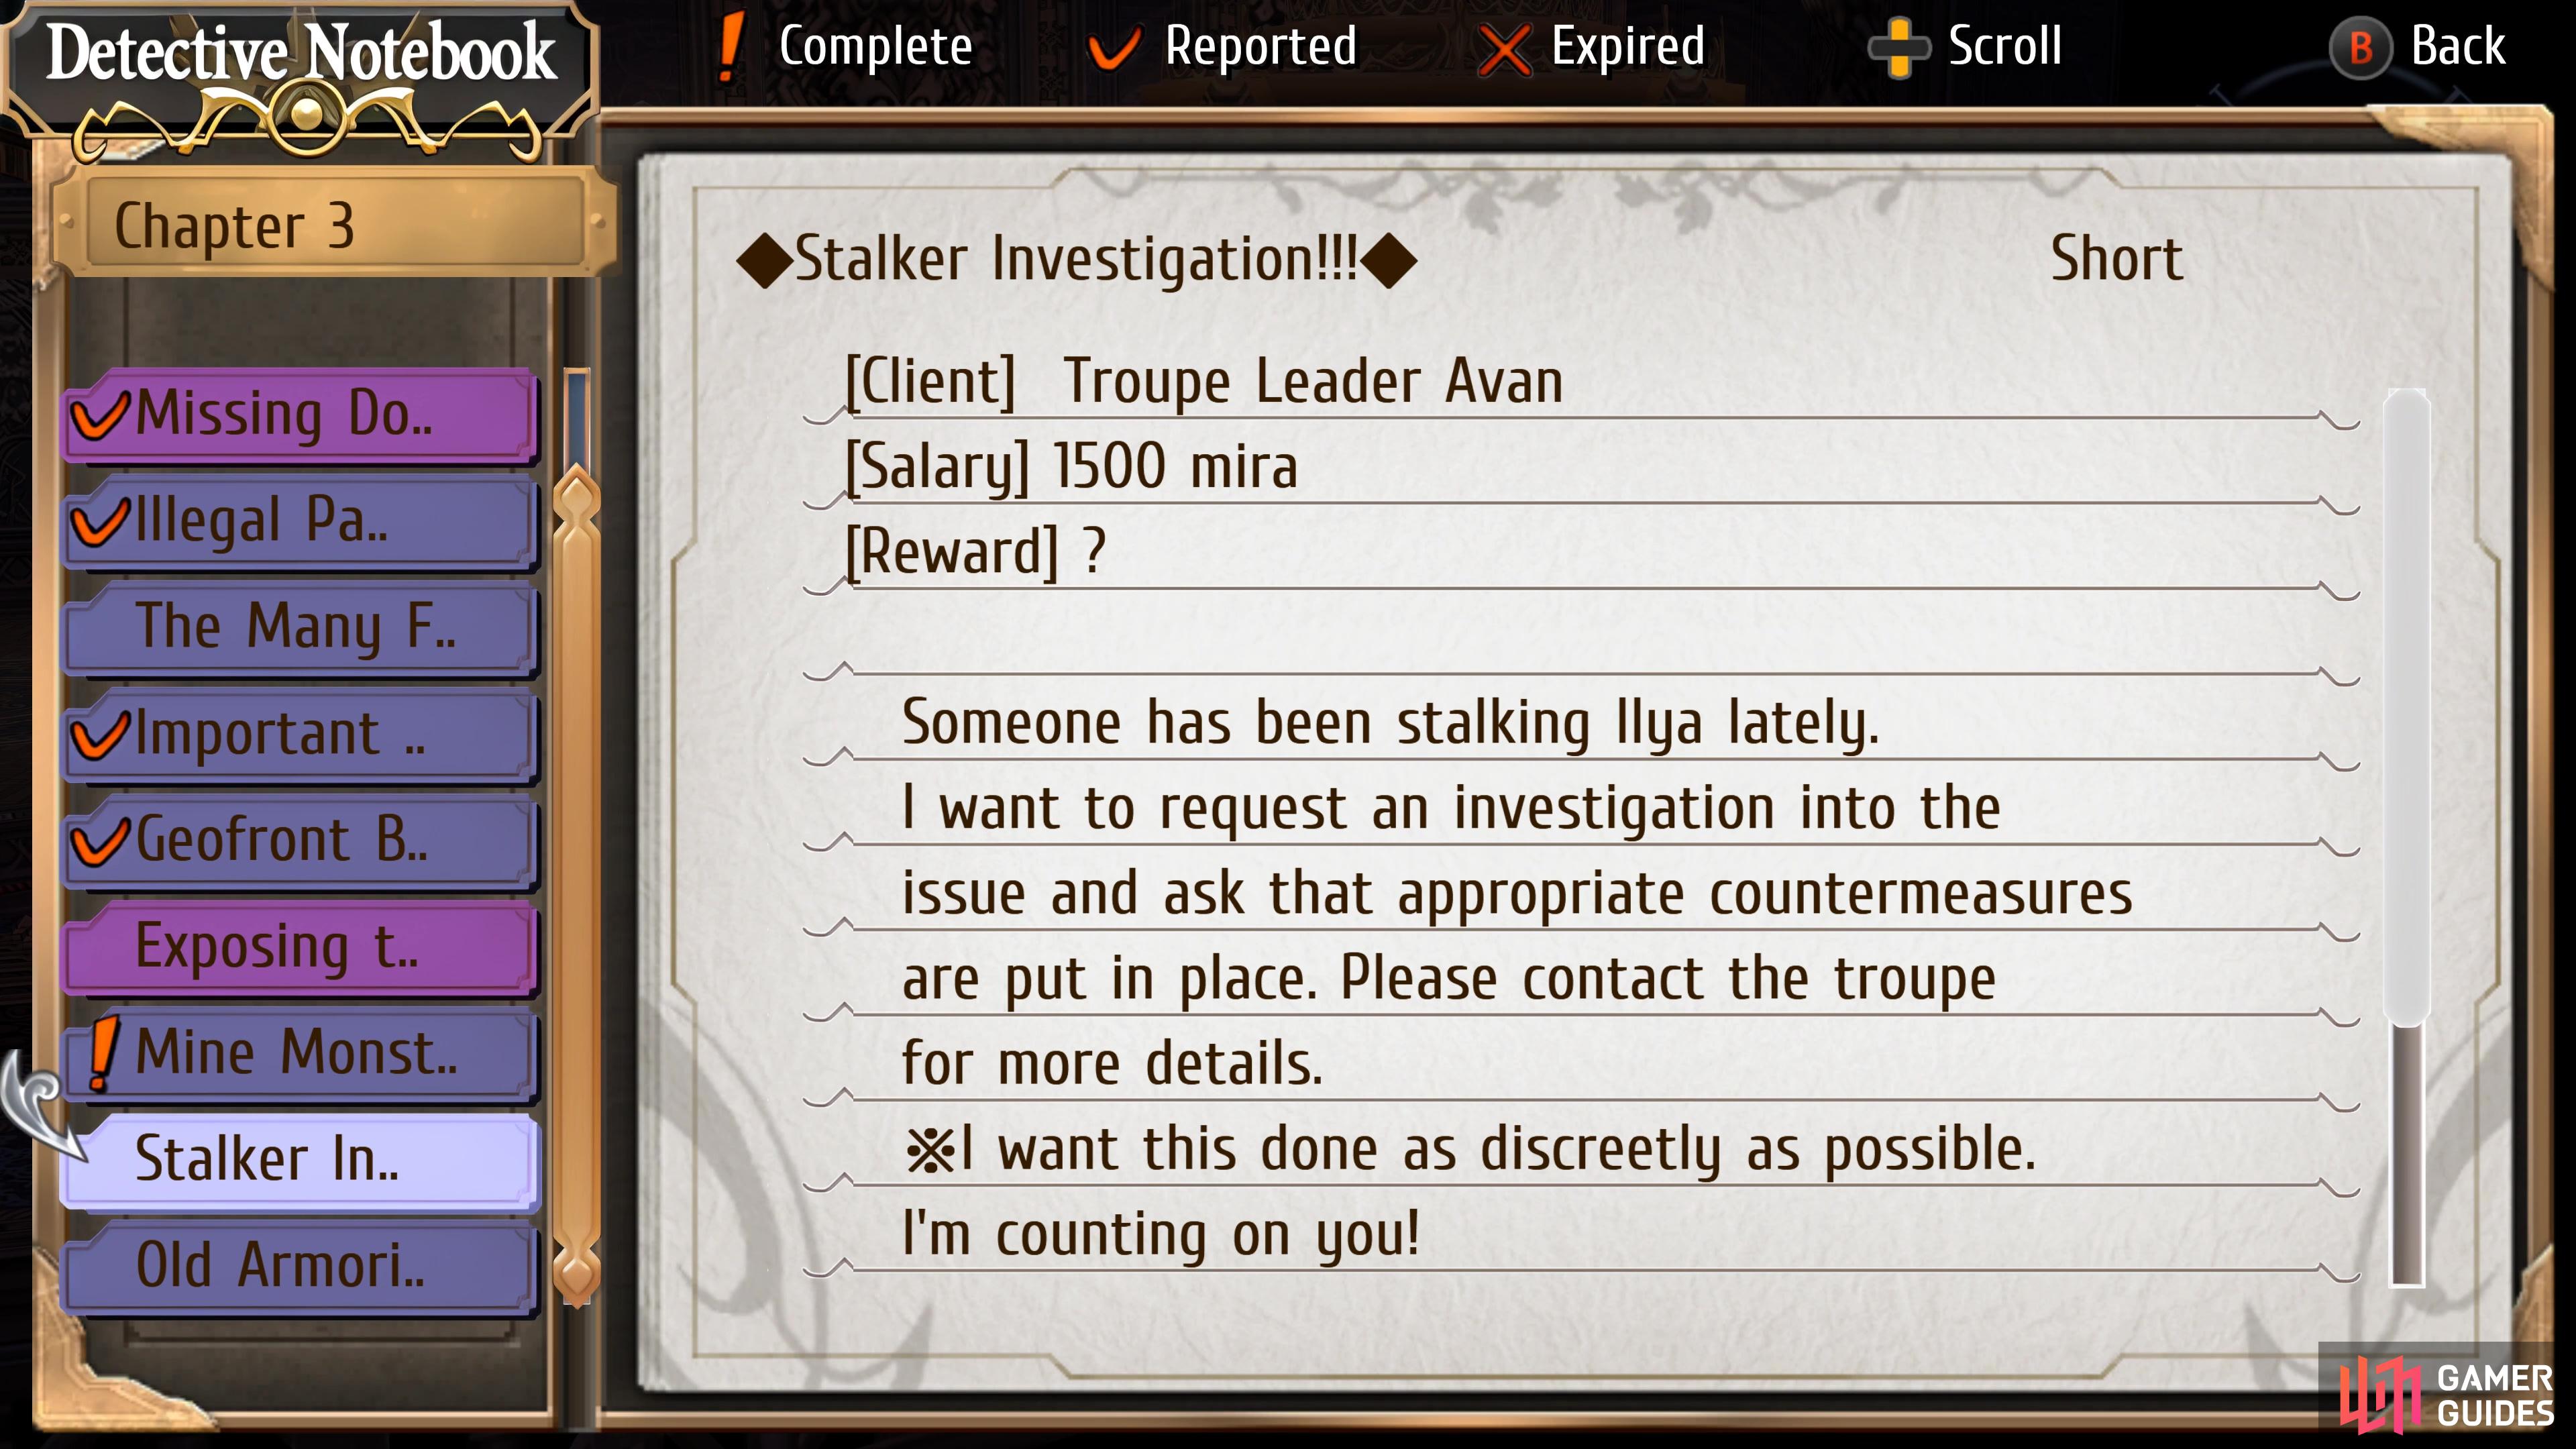 Stalker Investigation!!! is a Request on Chapter 3 Day 2.